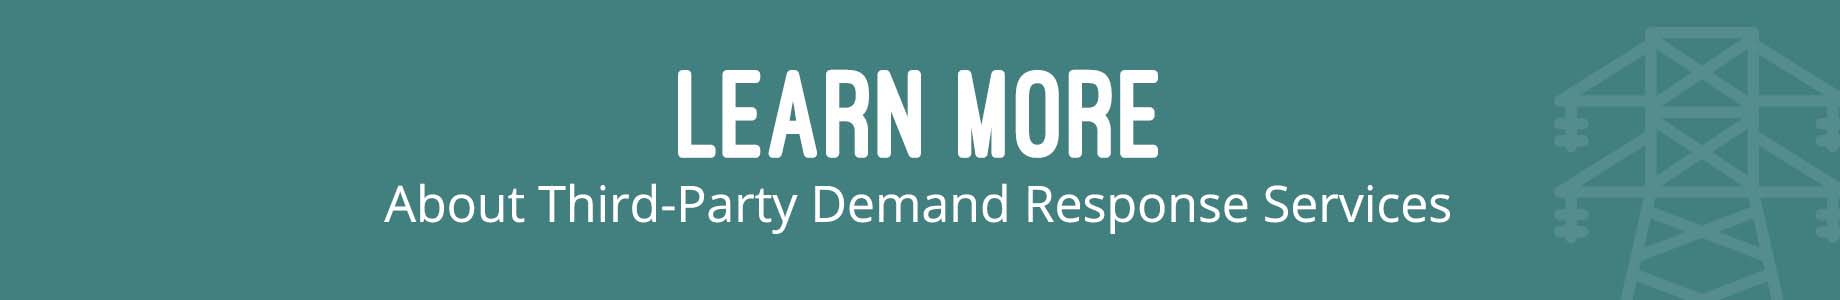 Learn More About Third-Party Demand Response Services